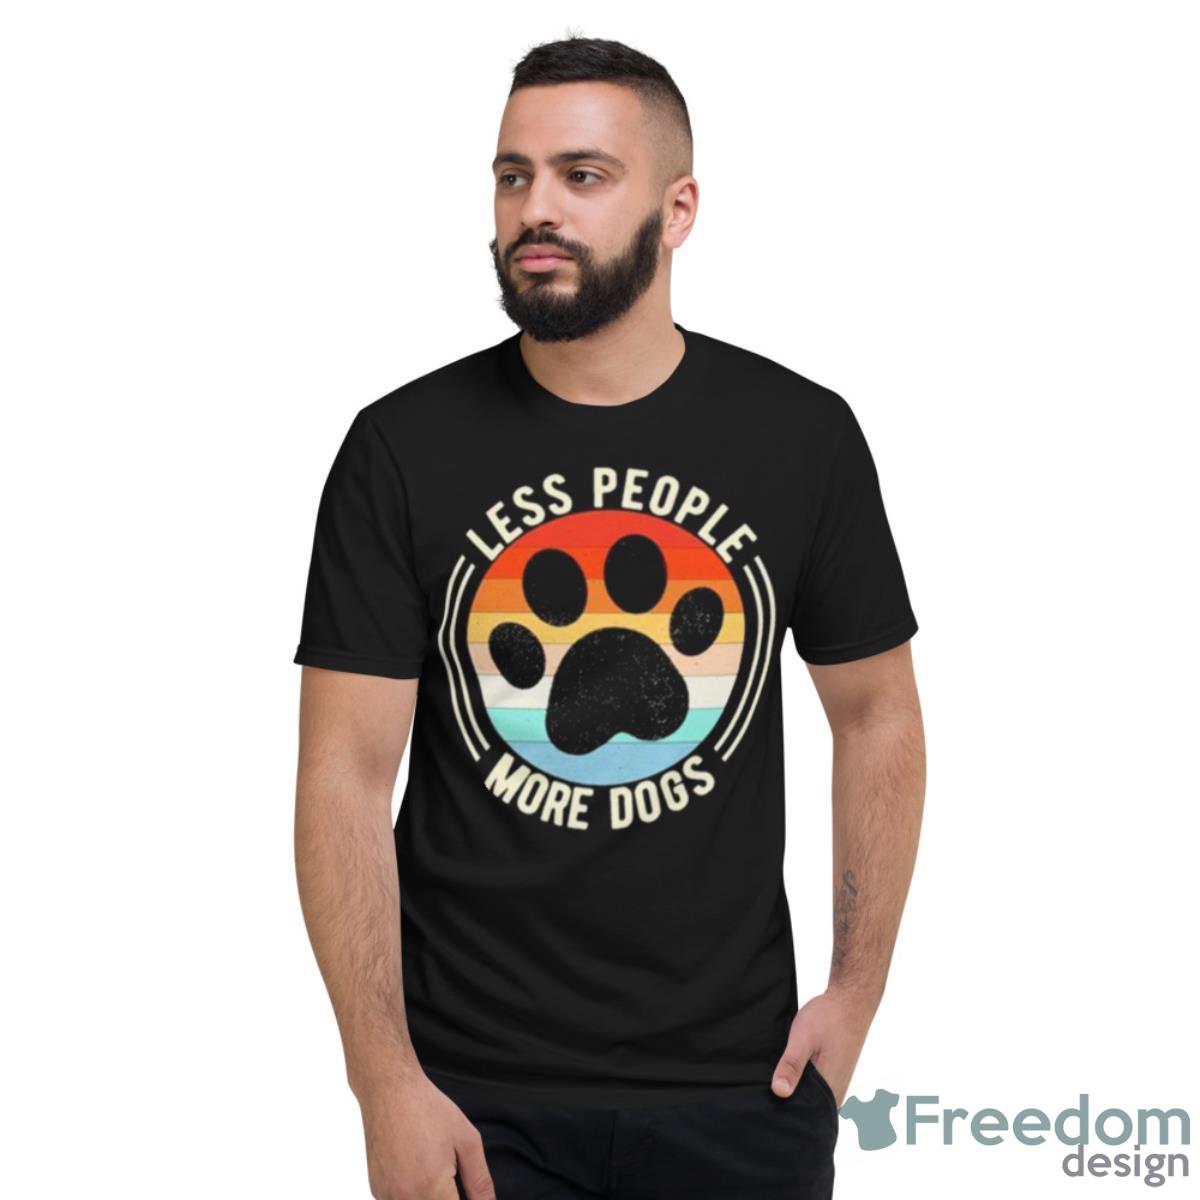 Less People More Dogs Feet Vintage Shirt